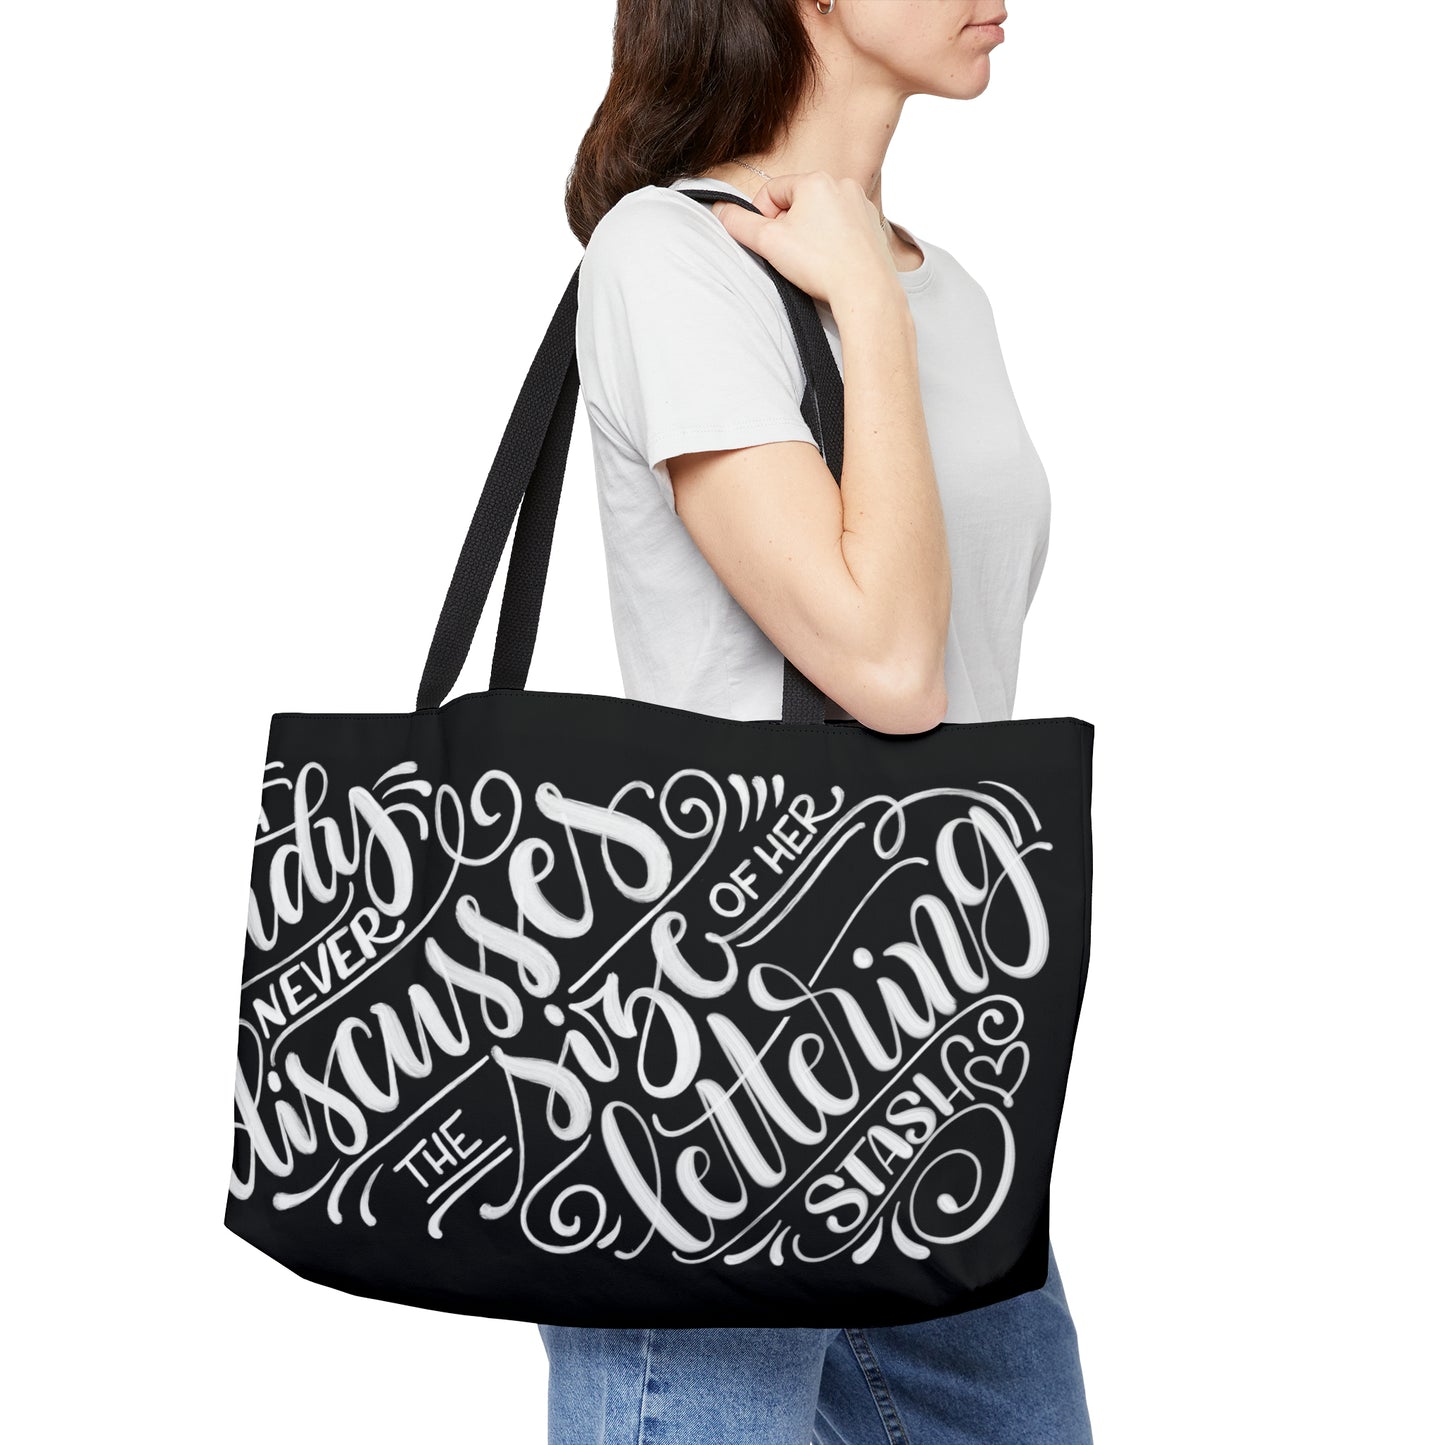 A lady never discusses the size of her lettering stash - Weekender Tote Bag - howjoyfulshop